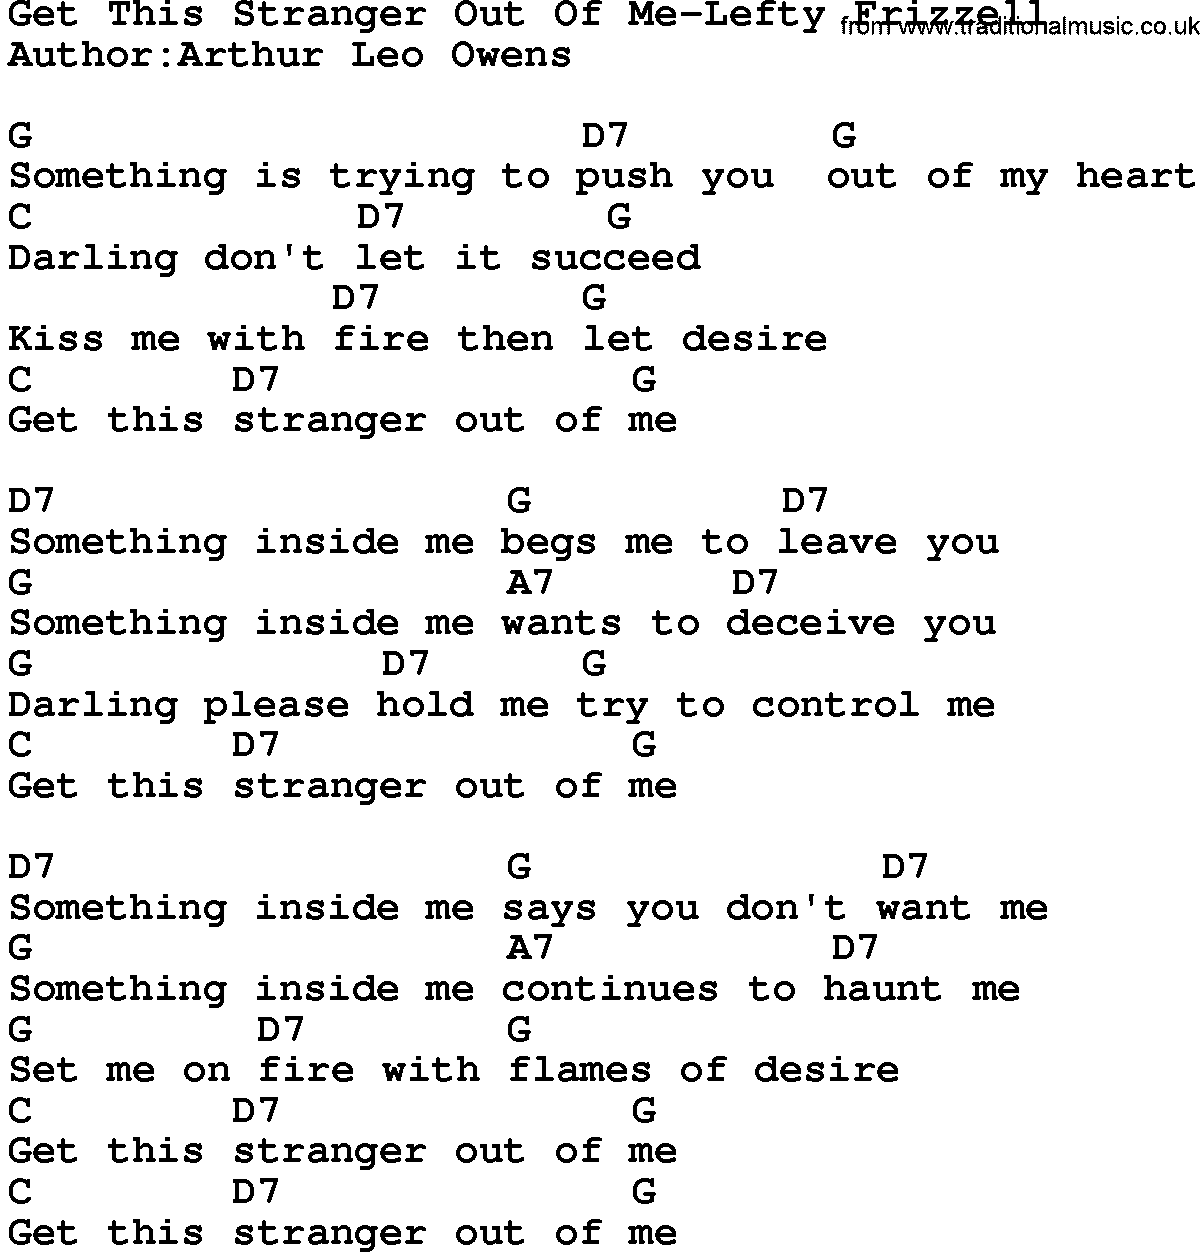 Country music song: Get This Stranger Out Of Me-Lefty Frizzell lyrics and chords